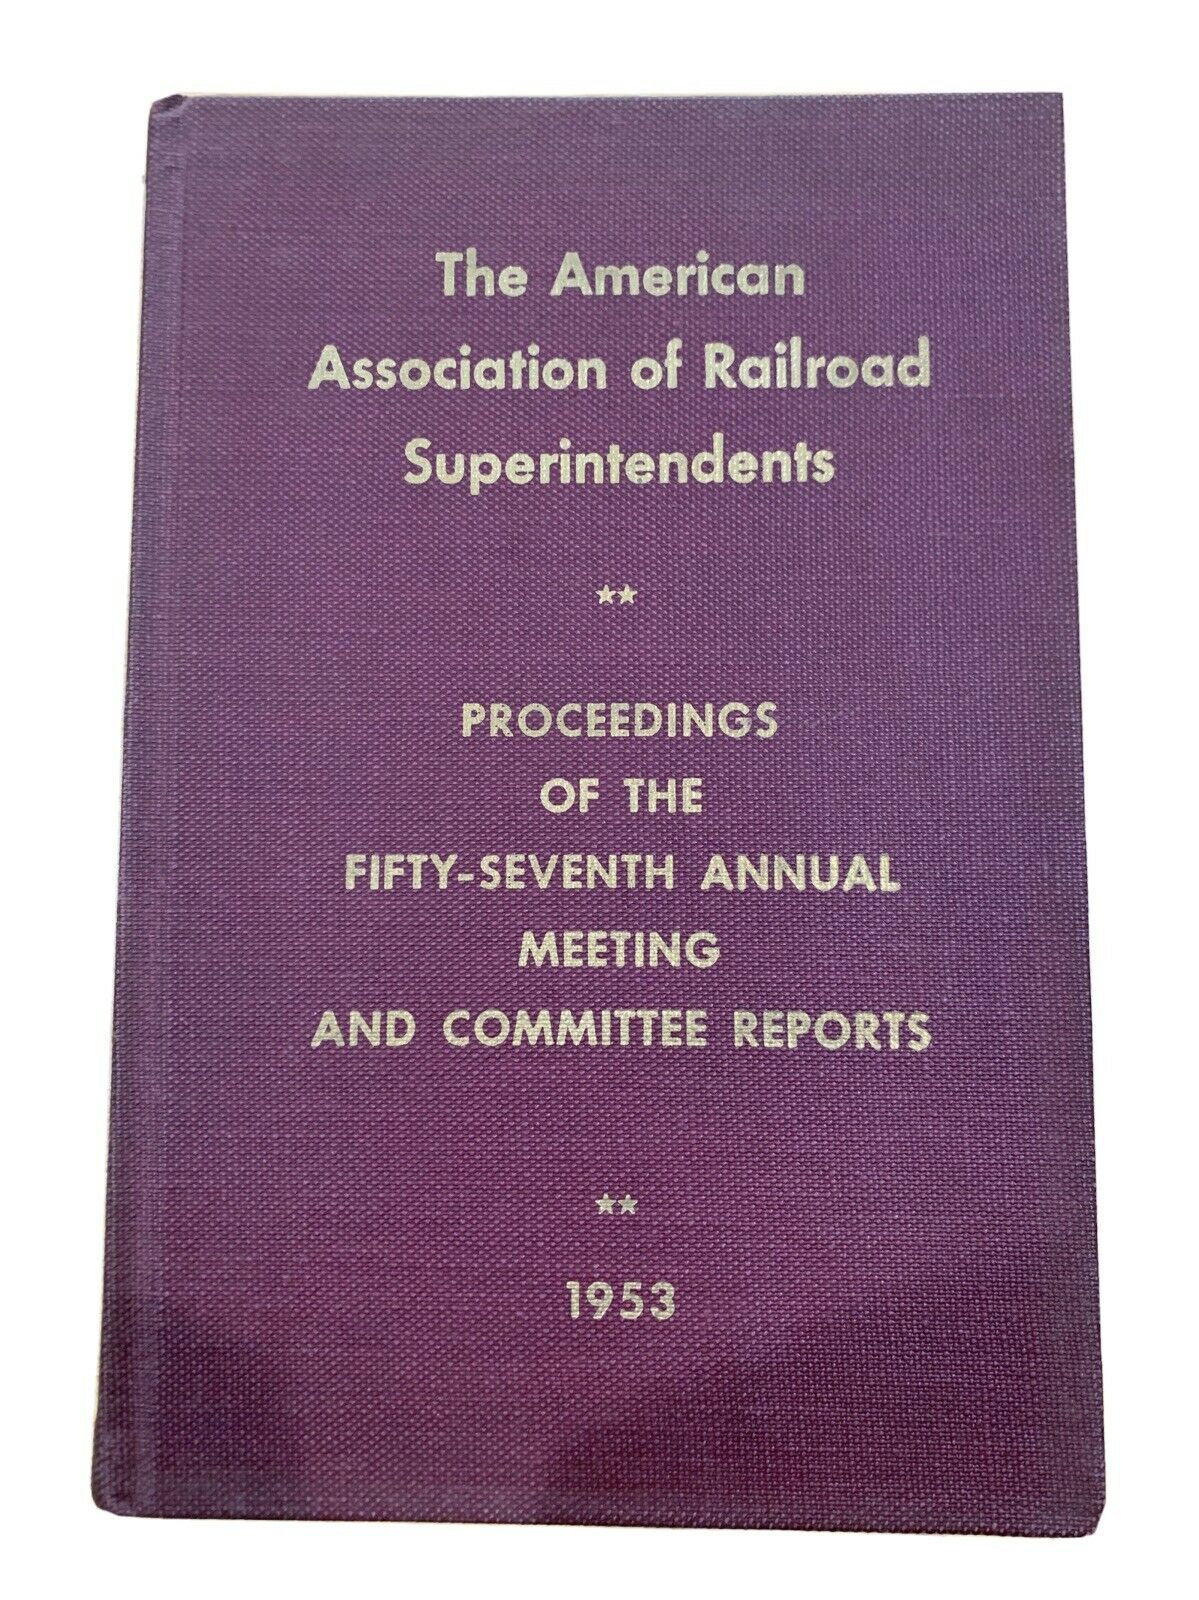 The American Association Of Railroad Superintendents, 1953